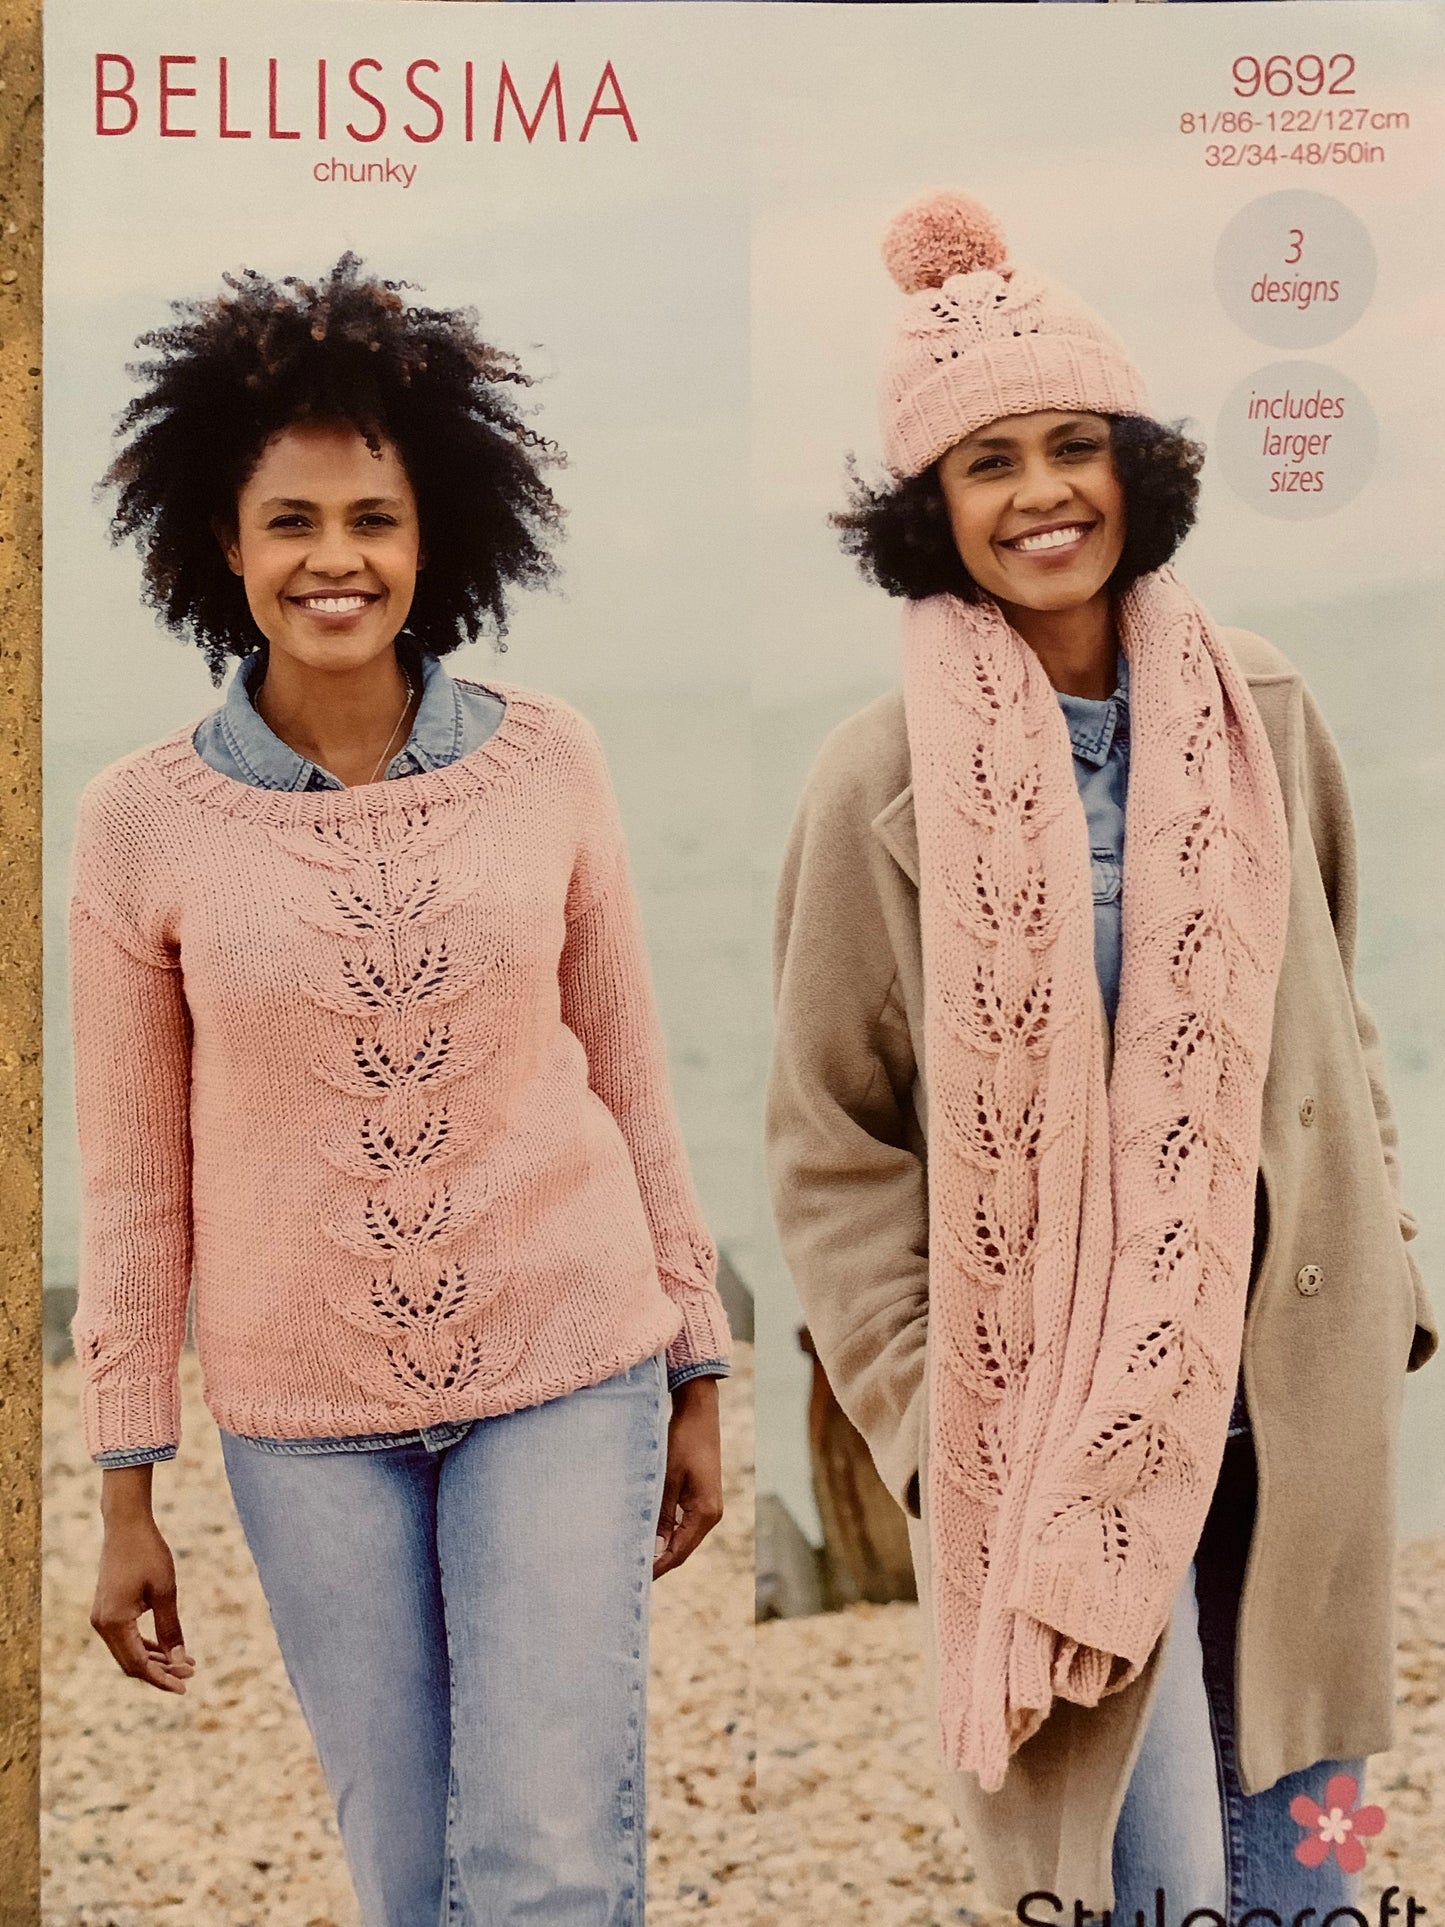 9692 Stylecraft Bellissima chunky ladies sweater, hat and scarf knitting pattern